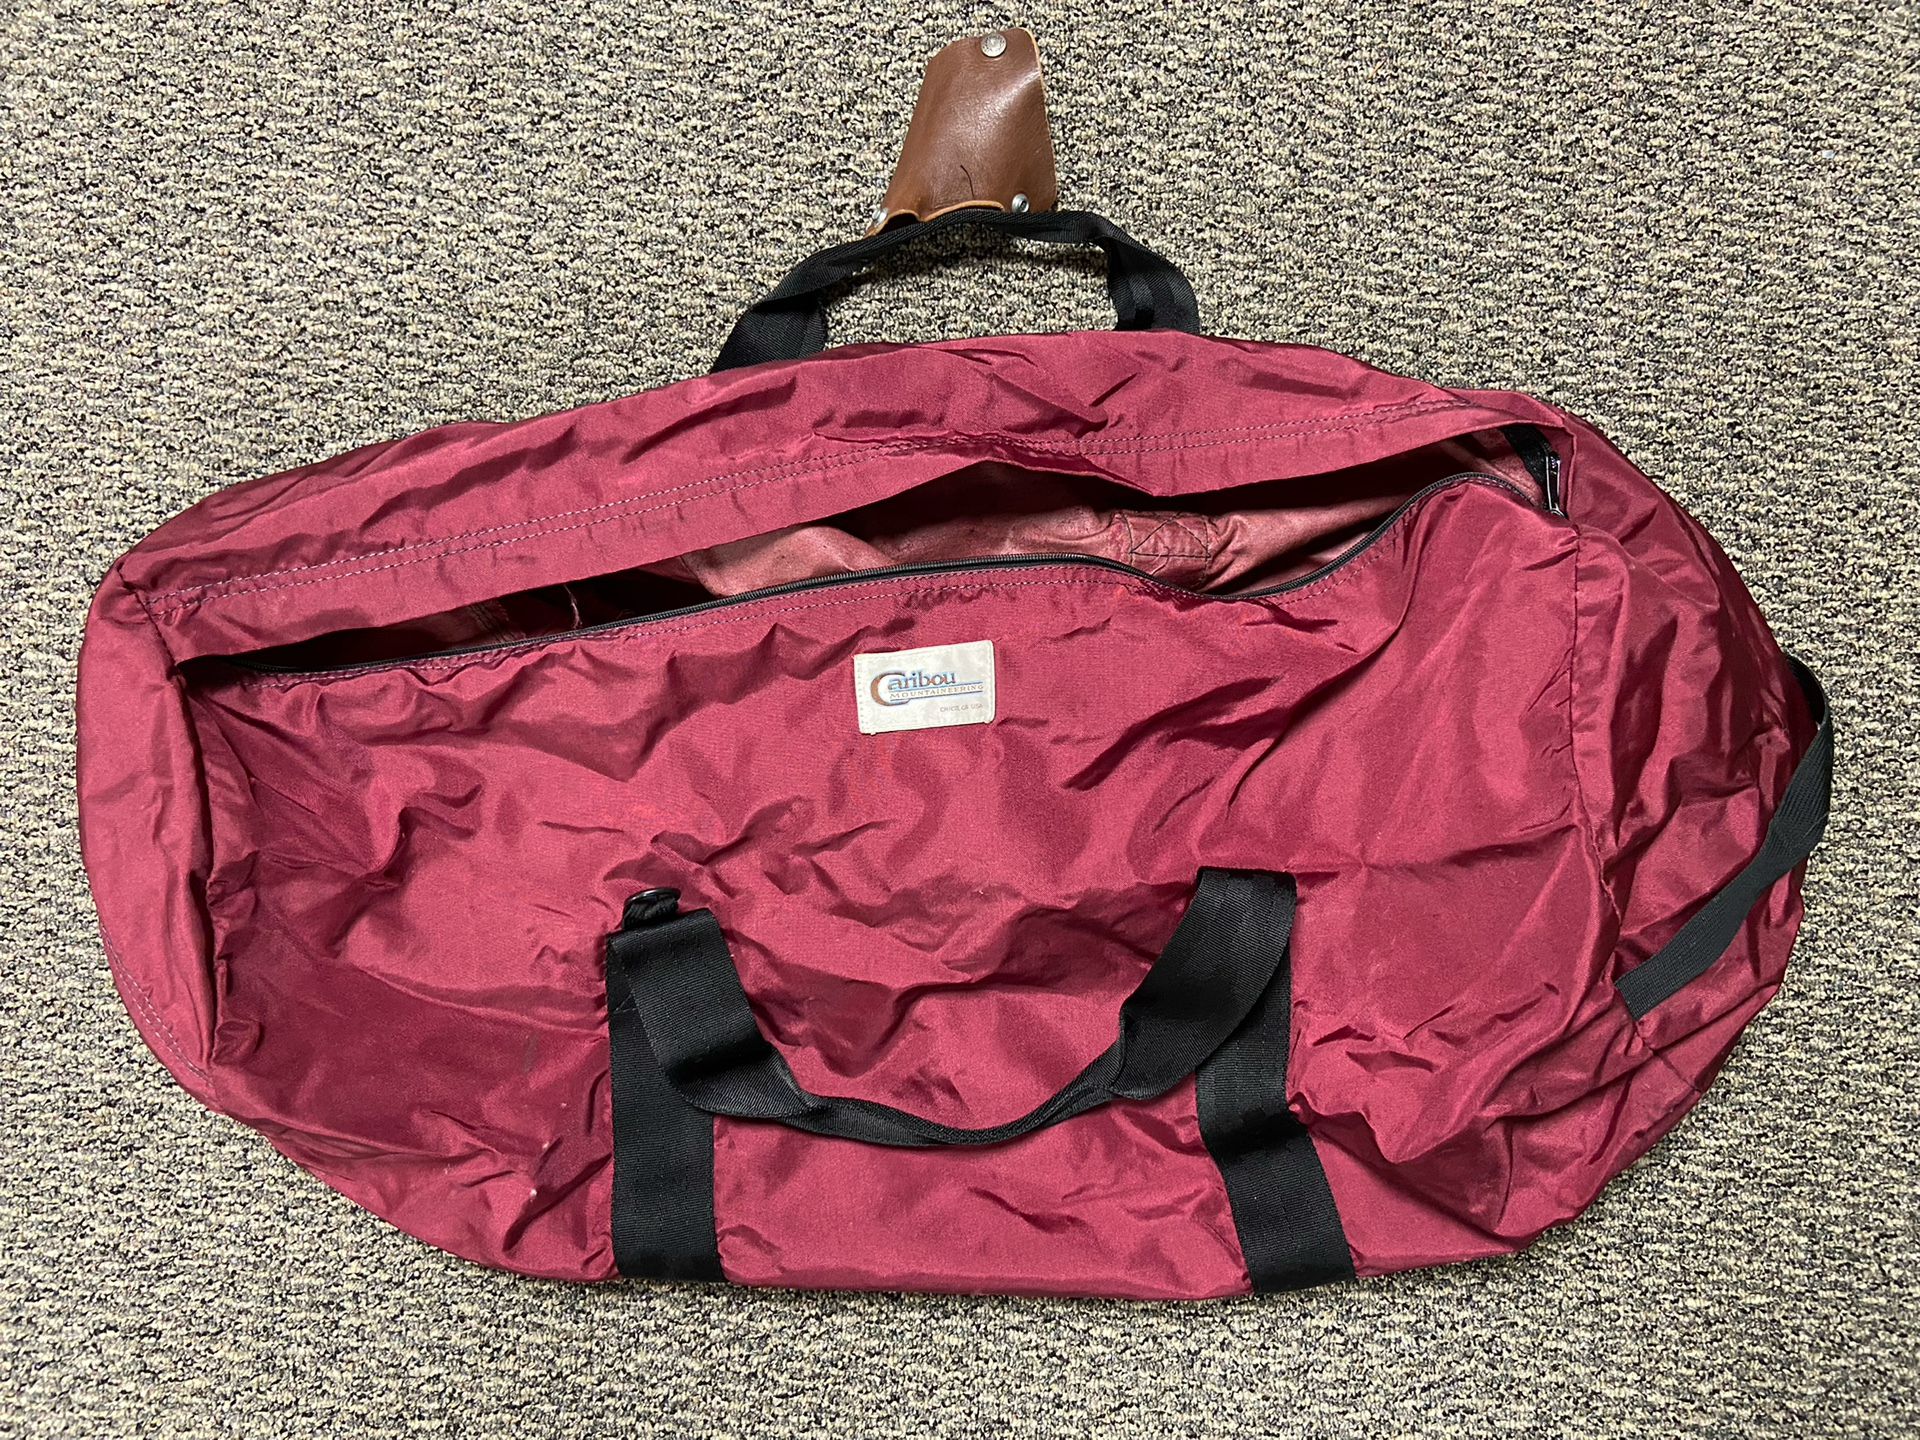 Caribou Brand Duffle Bags and Backpack